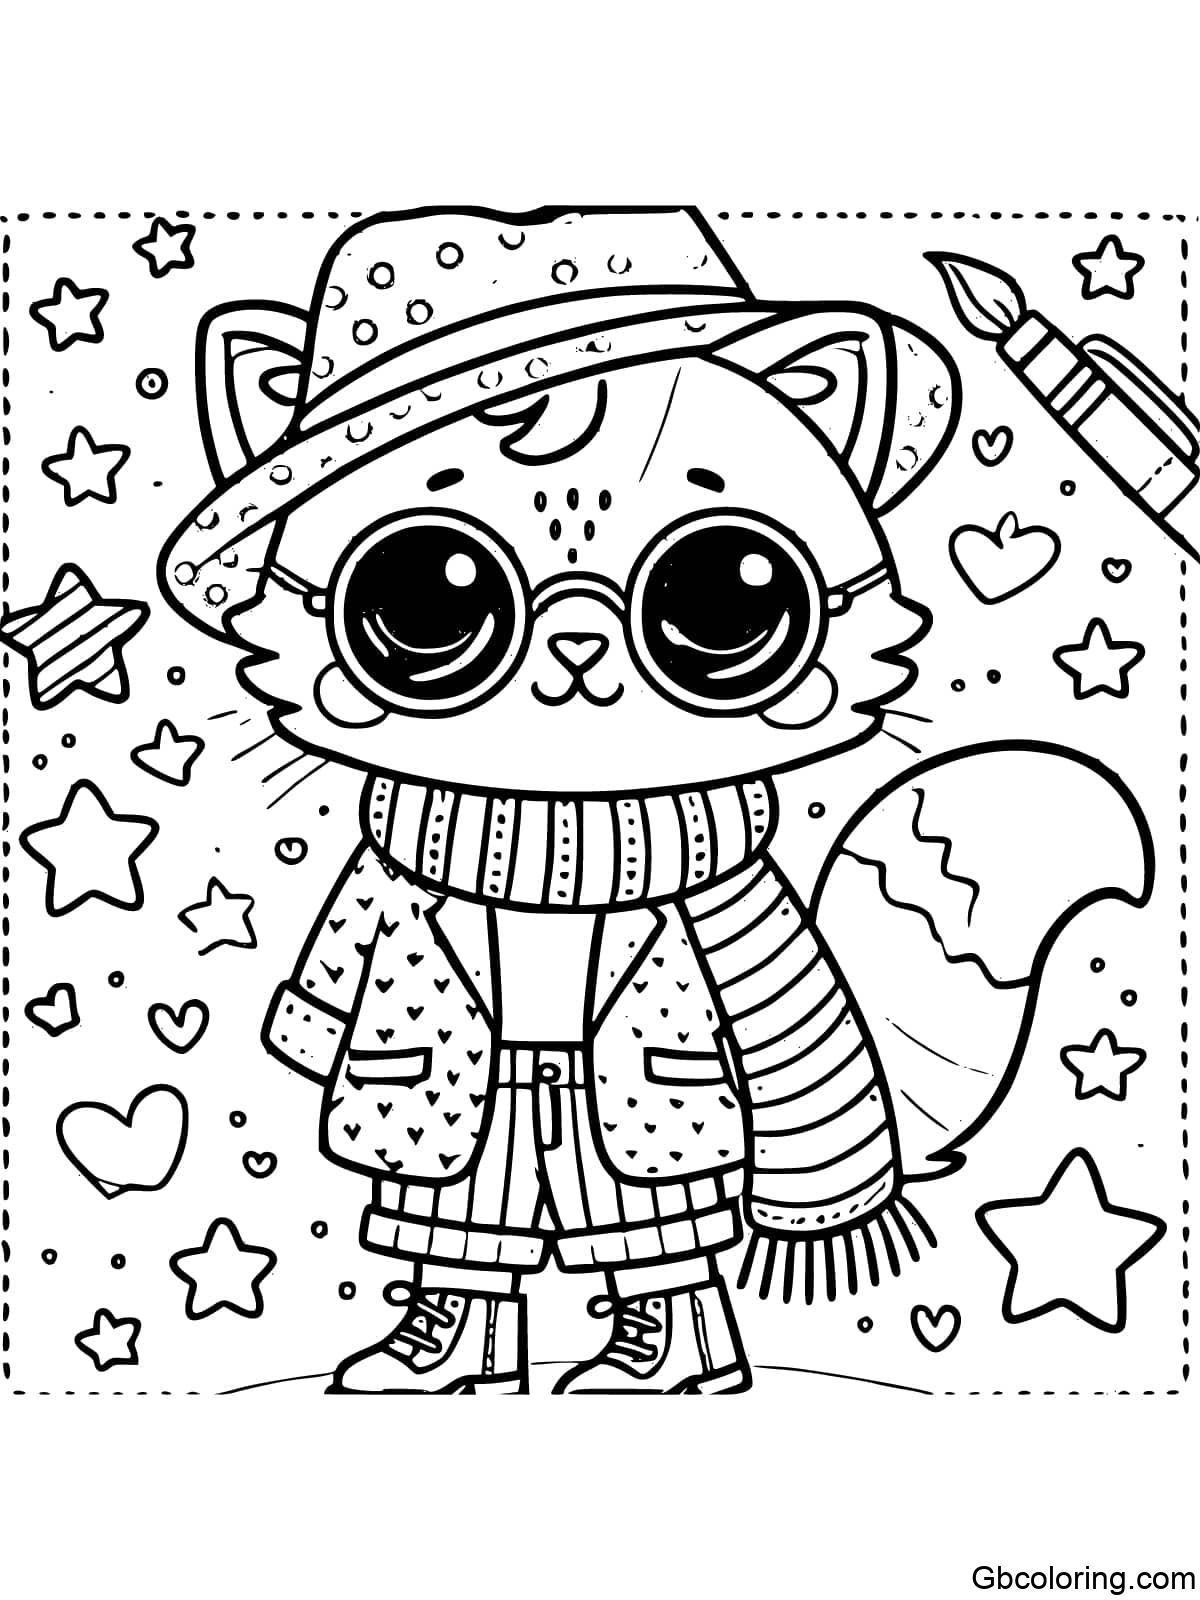 A stylish fashion cartoon cat dressed in trendy clothes